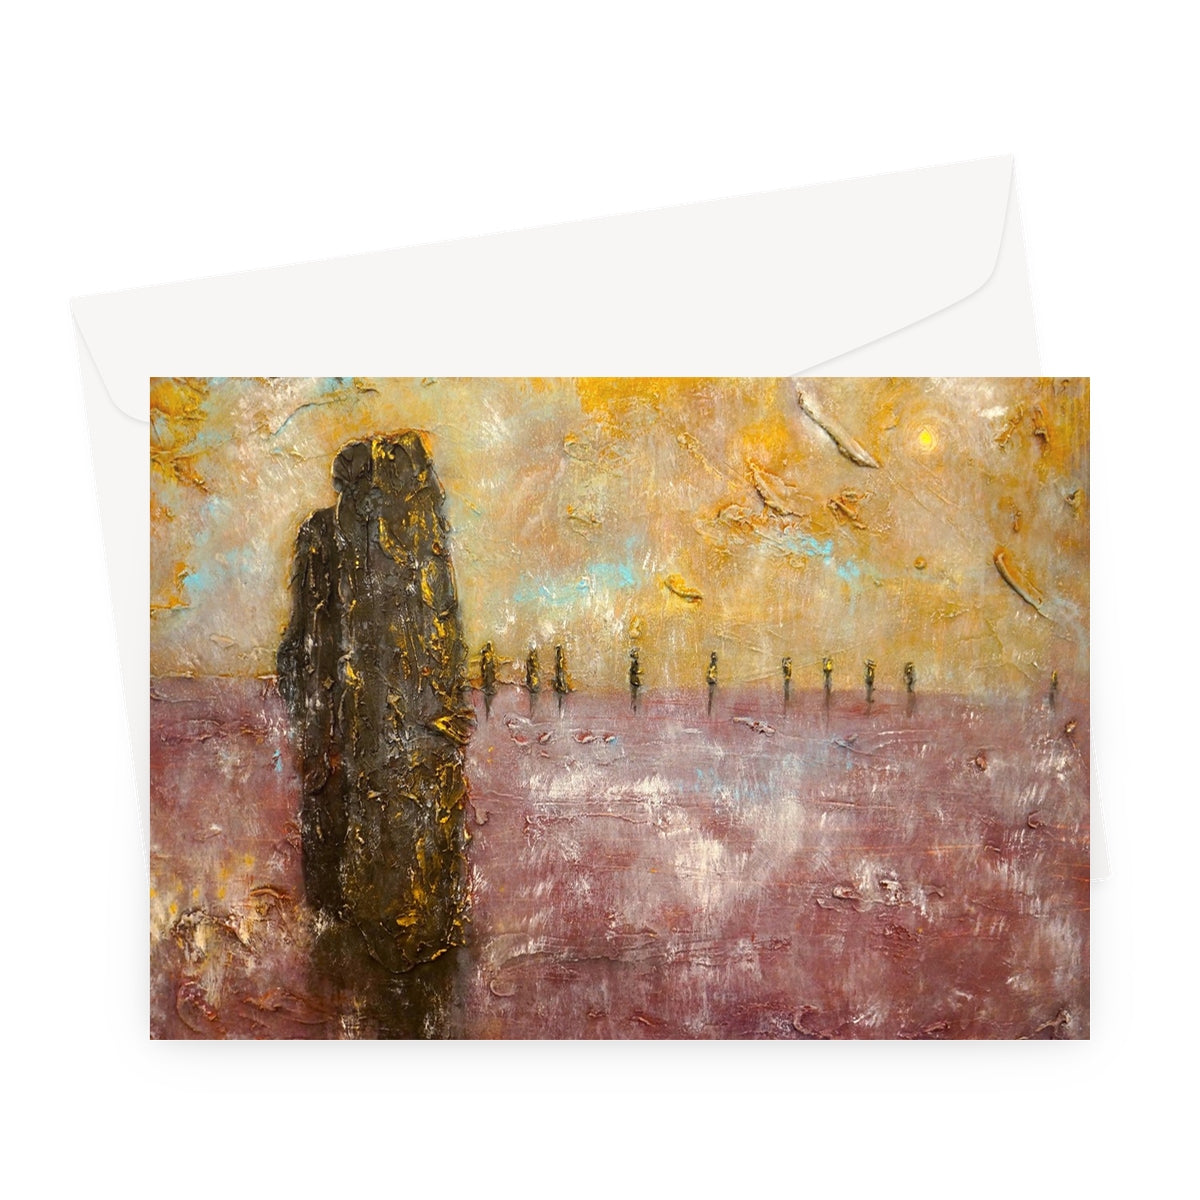 Brodgar Mist Orkney Art Gifts Greeting Card-Greetings Cards-Orkney Art Gallery-A5 Landscape-10 Cards-Paintings, Prints, Homeware, Art Gifts From Scotland By Scottish Artist Kevin Hunter